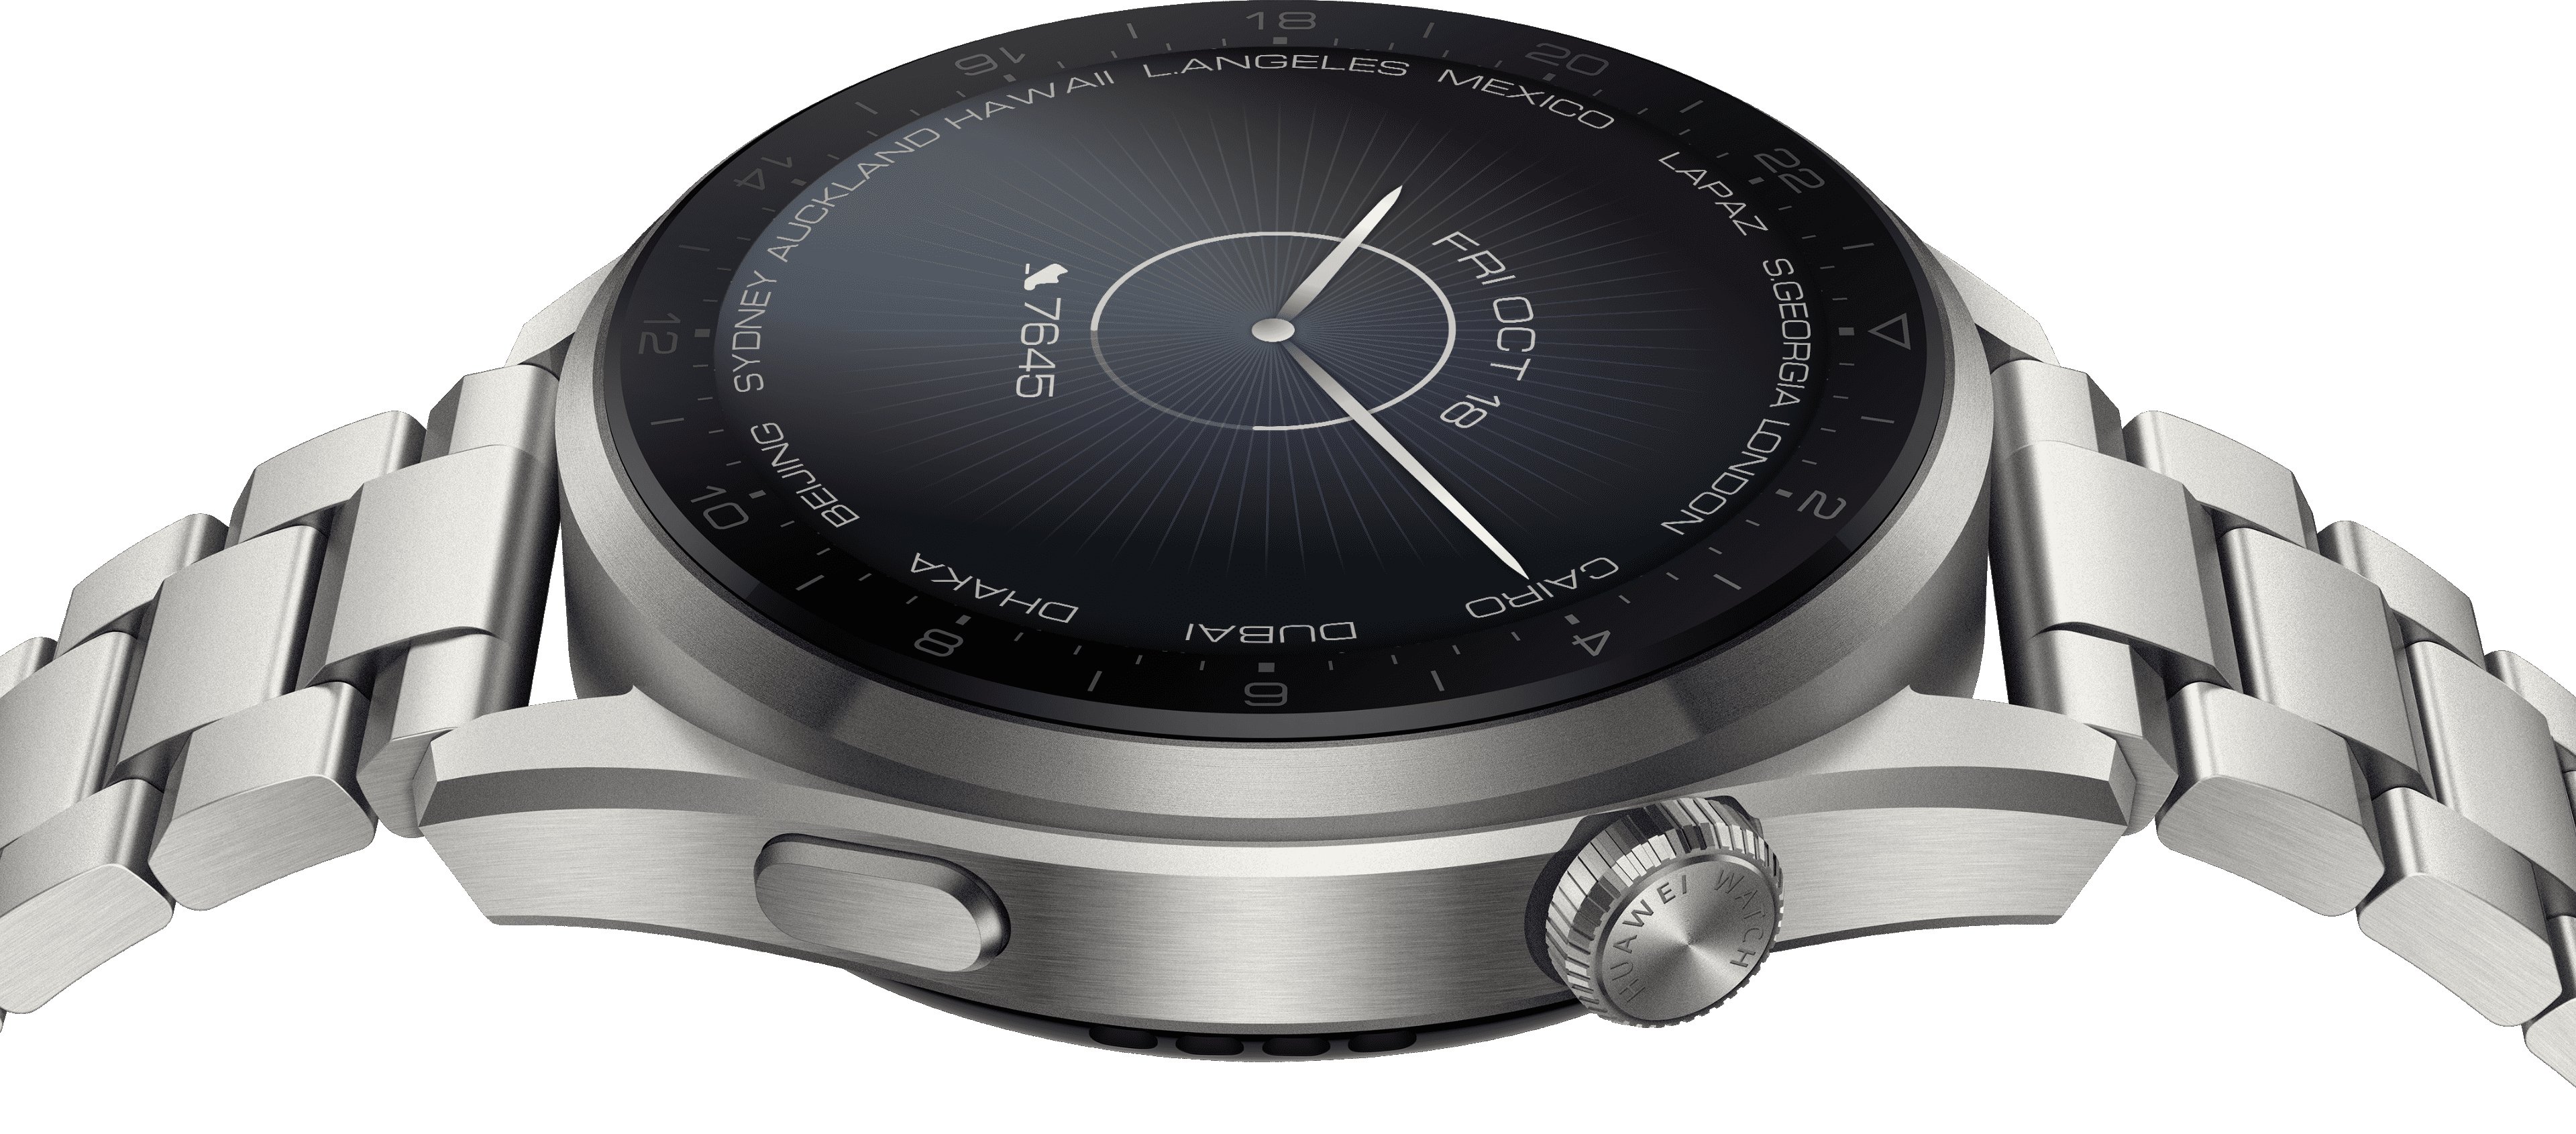 Huawei Watch 3 unveiled with HarmonyOS, eSIM, 3-day battery, 3 Pro 